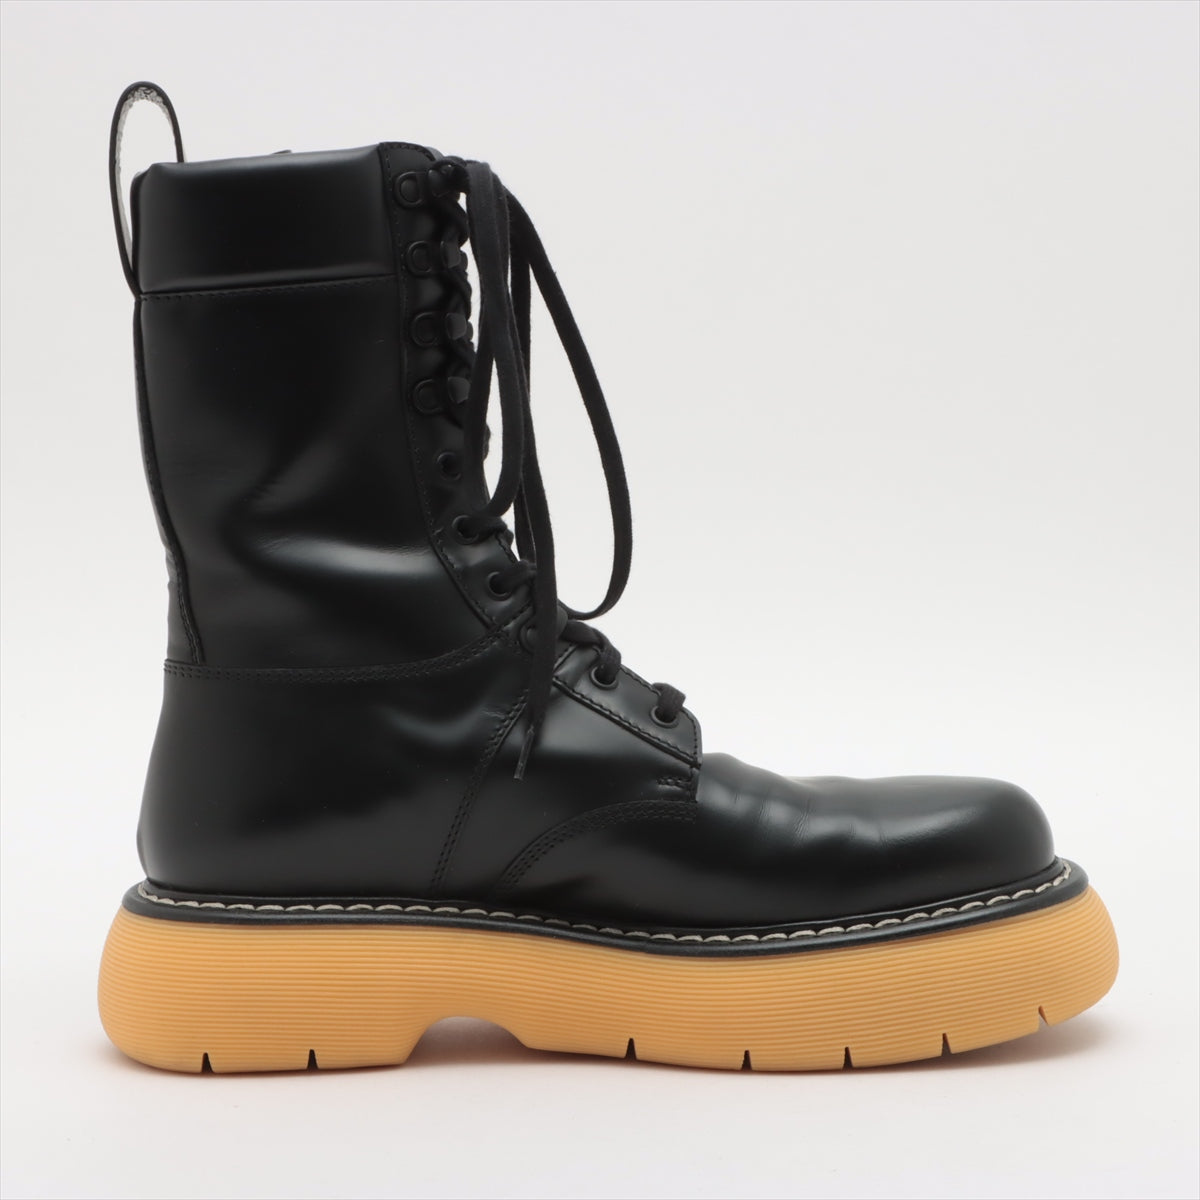 Bottega Veneta Leather Boots 42 Men's Black The Bounce Is there a replacement string There is a thread on the upper